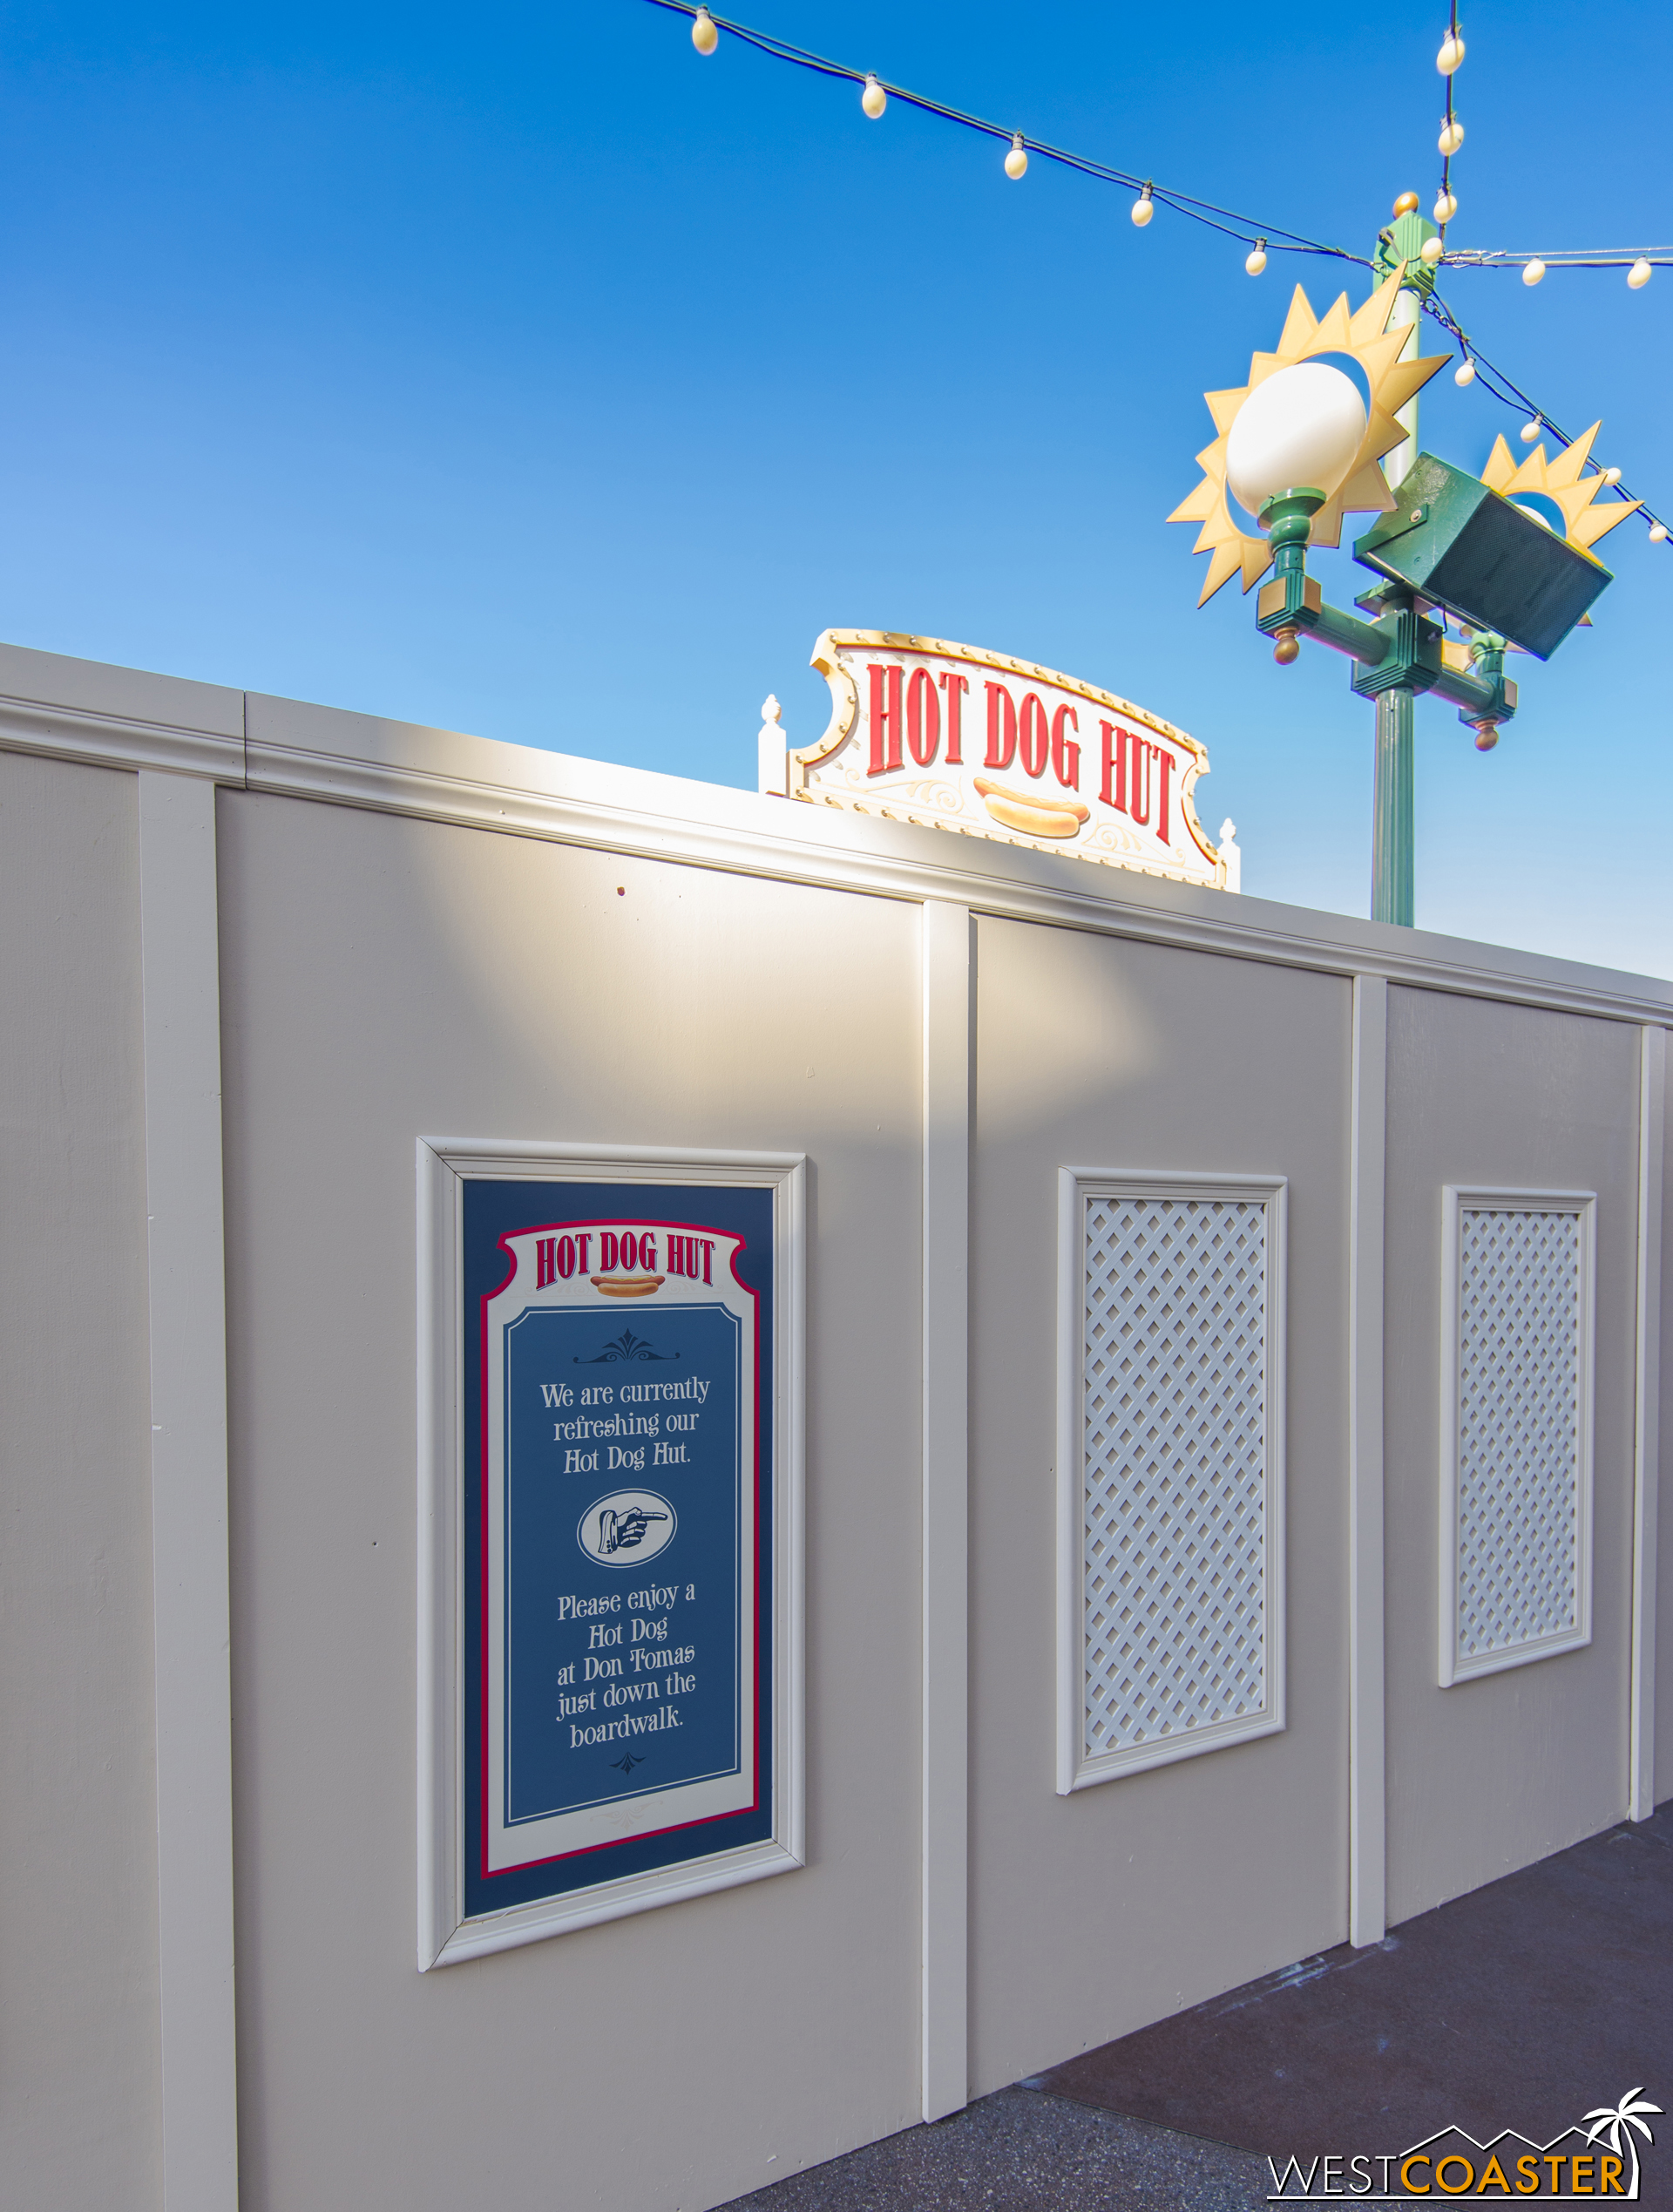  Over in Disney California Adventure, if you must have a hot dog on Paradise Pier, you're out of luck. 